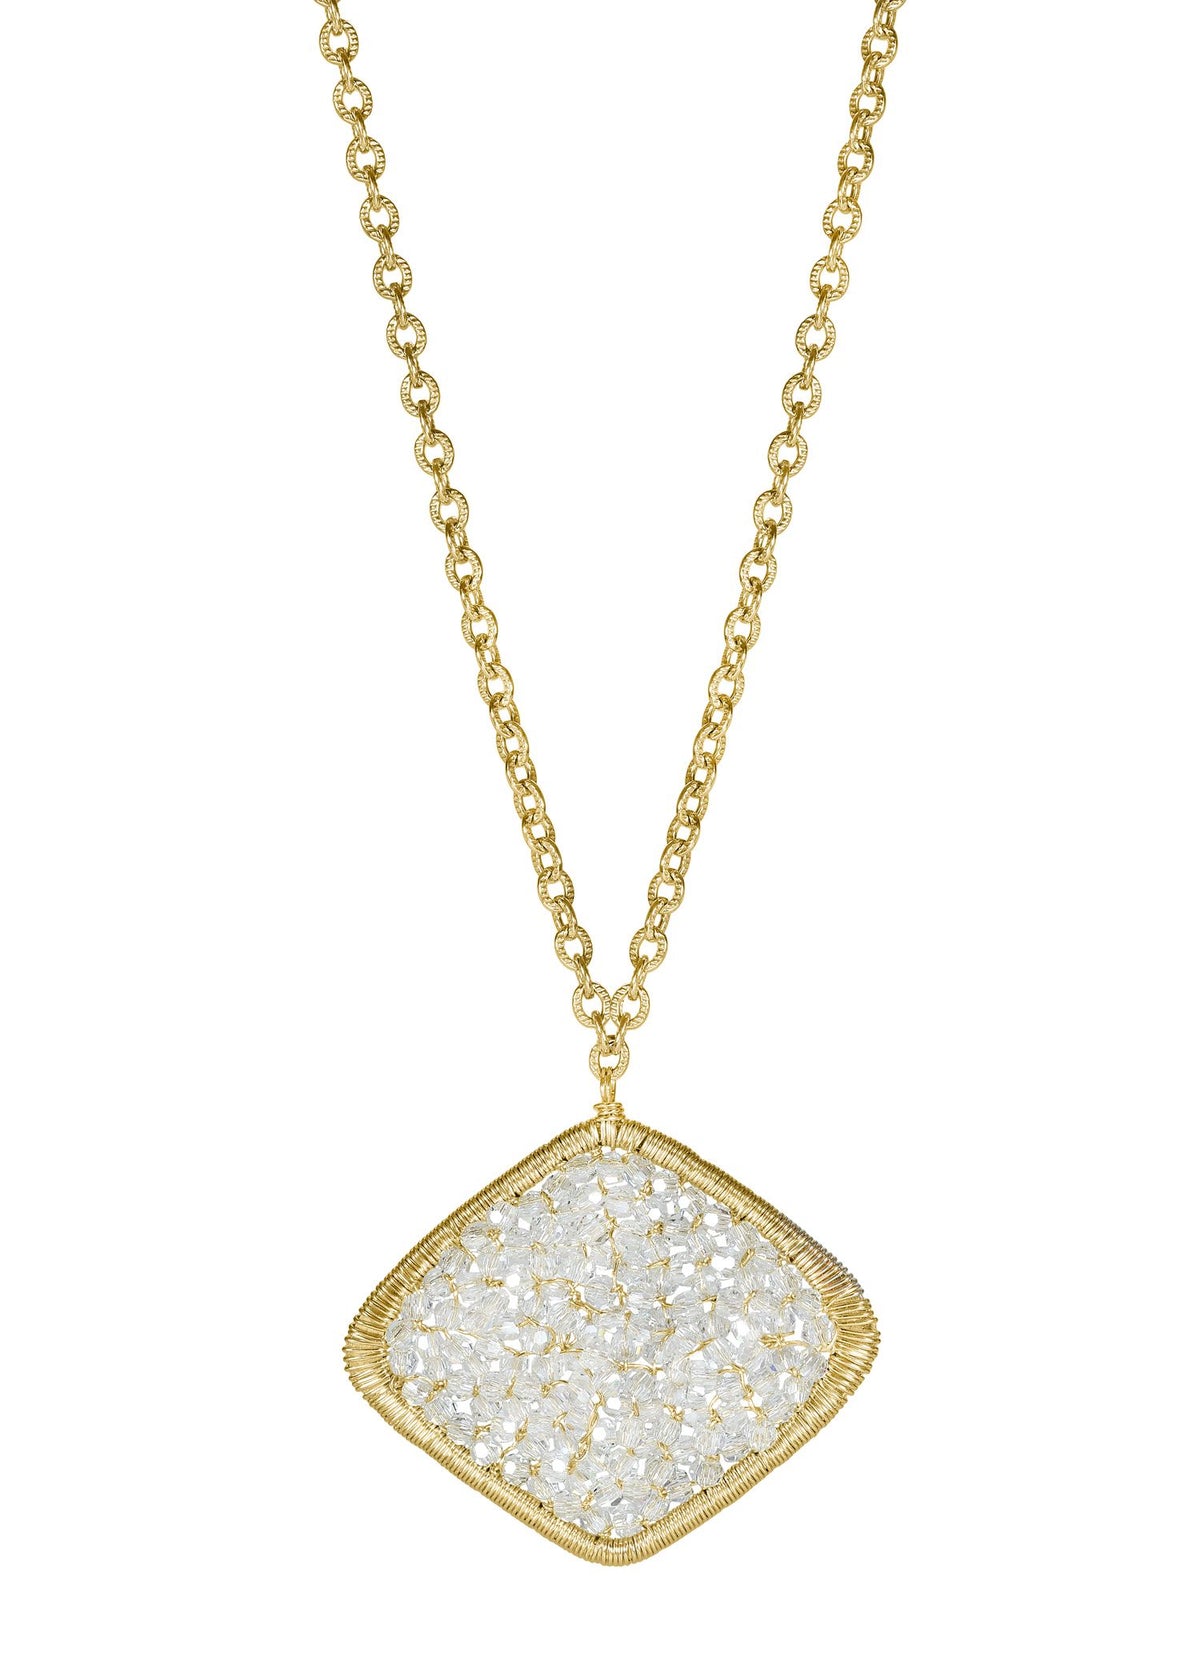 Crystal 14k gold fill Necklace measures 16-1/4” in length Pendant measures 11/16” in length and 1-1/4” in width Handmade in our Los Angeles studio